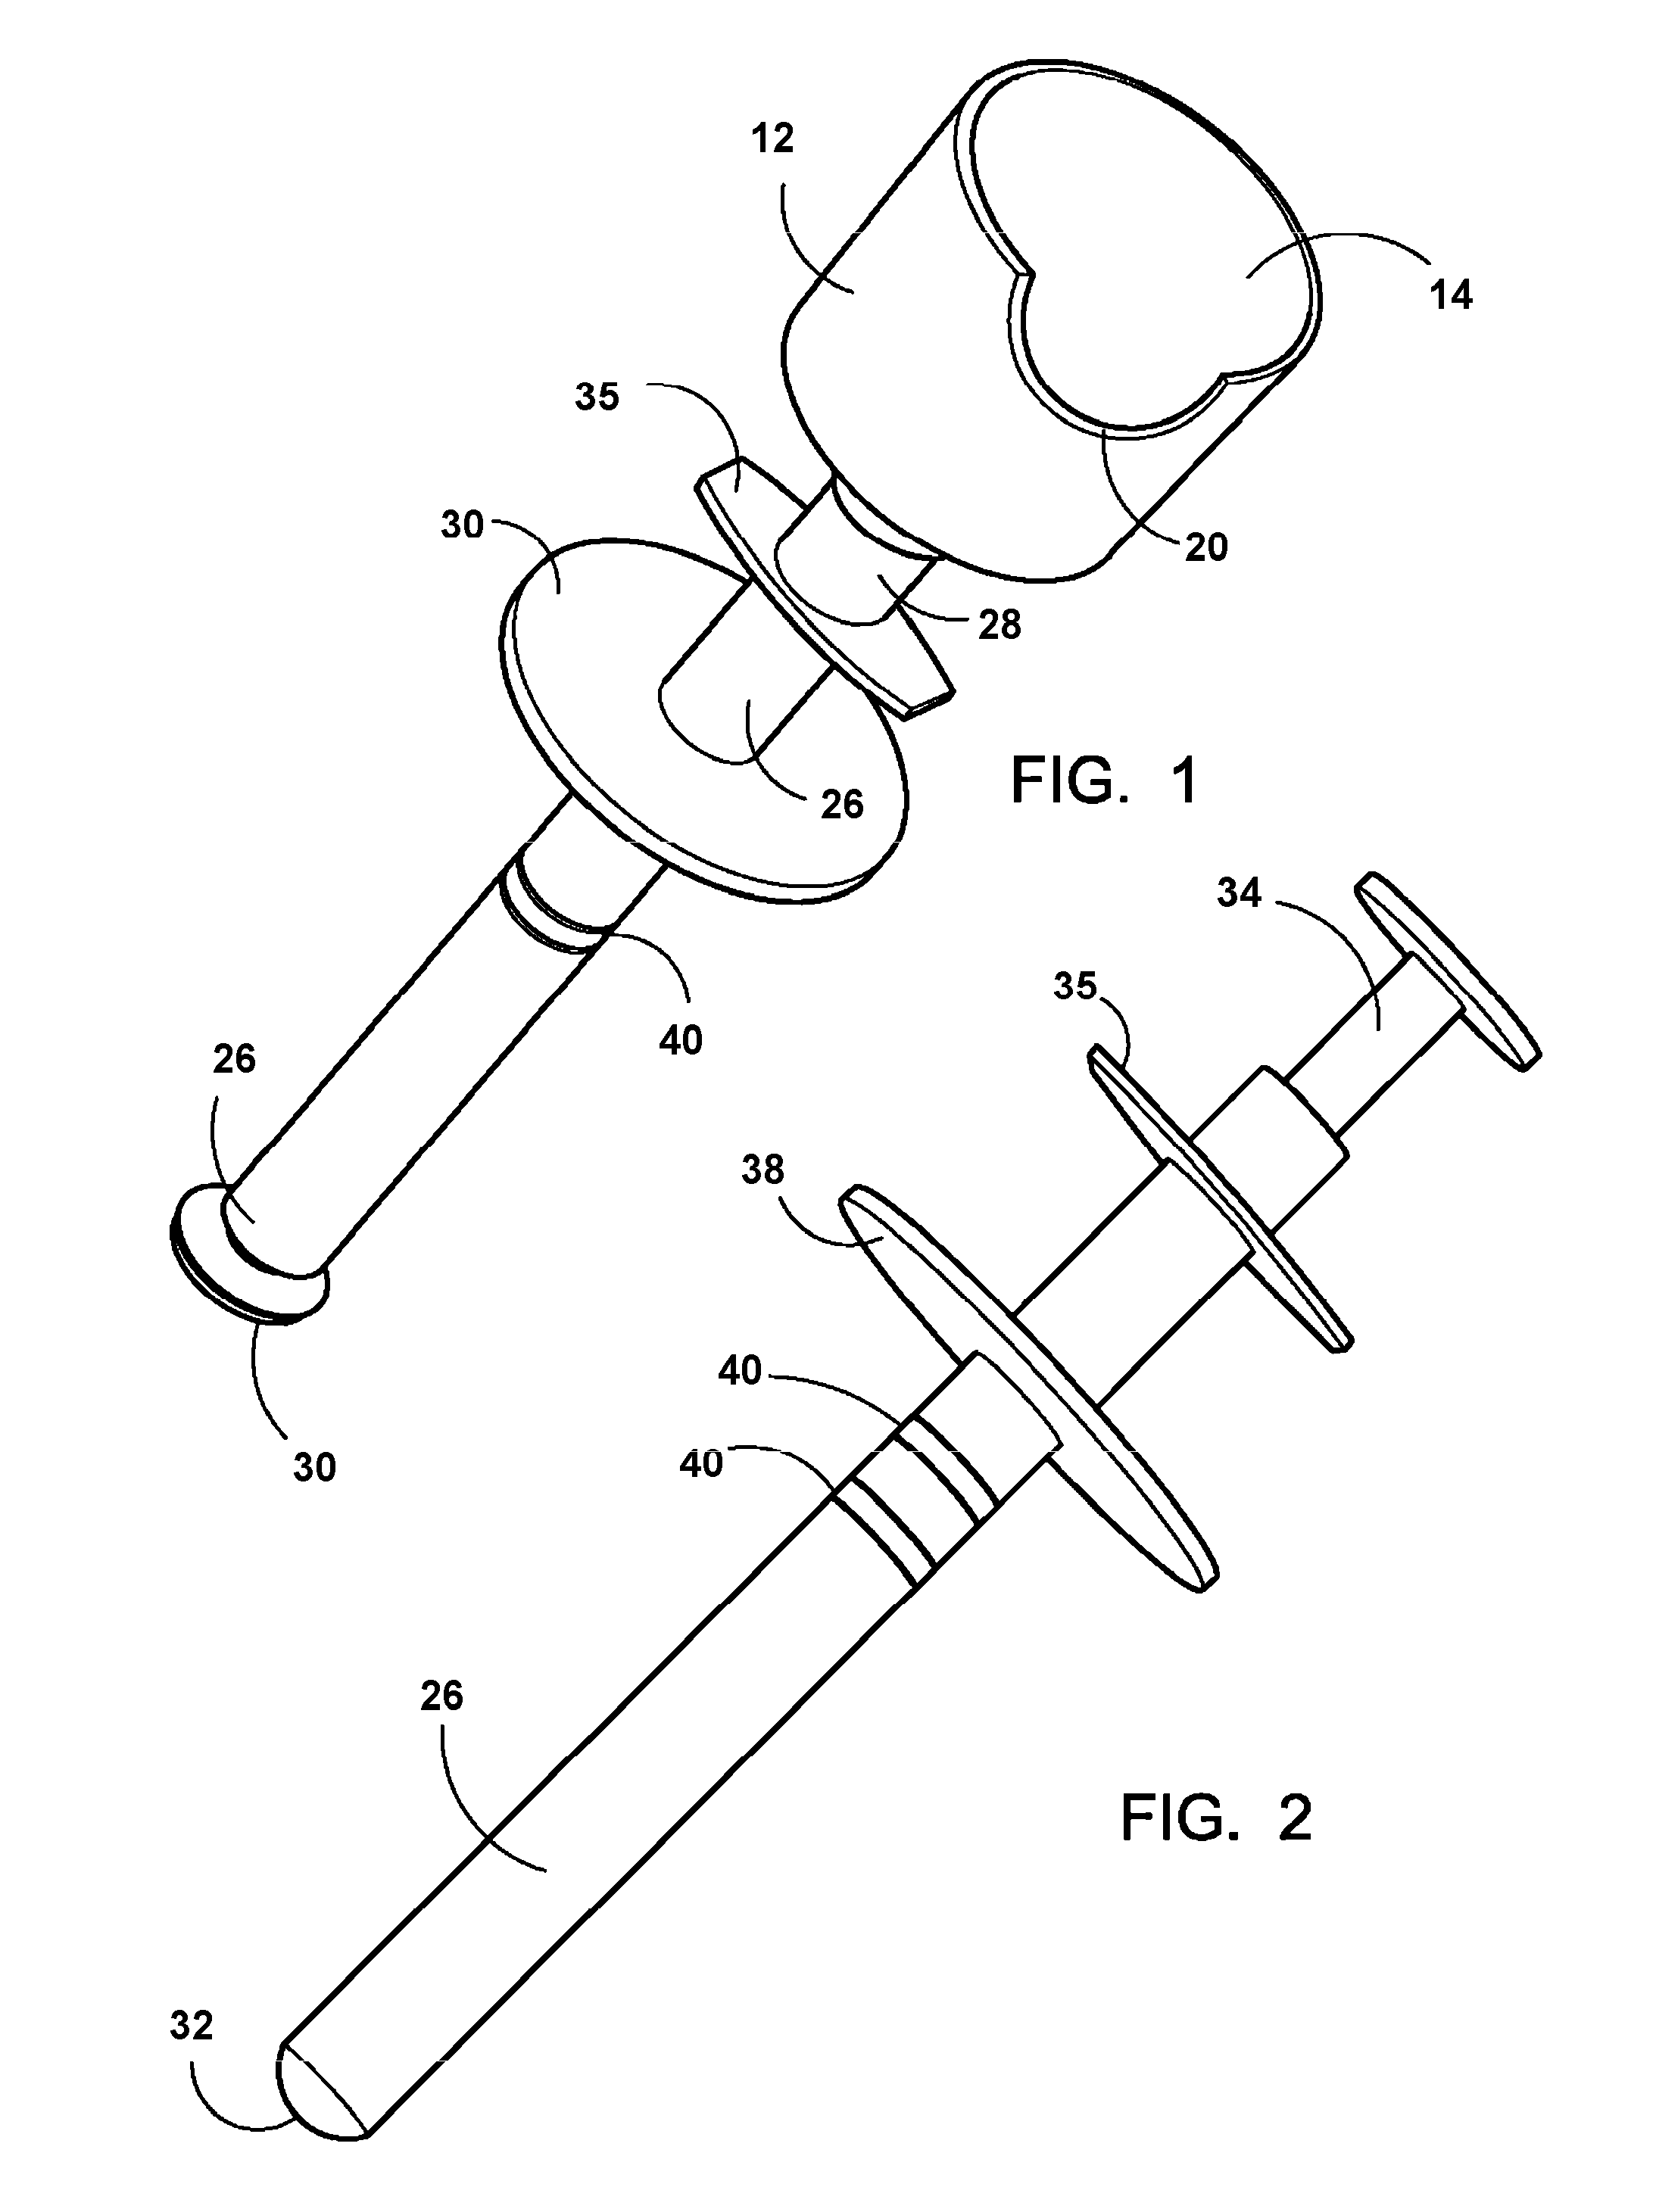 Reproductive infusion device